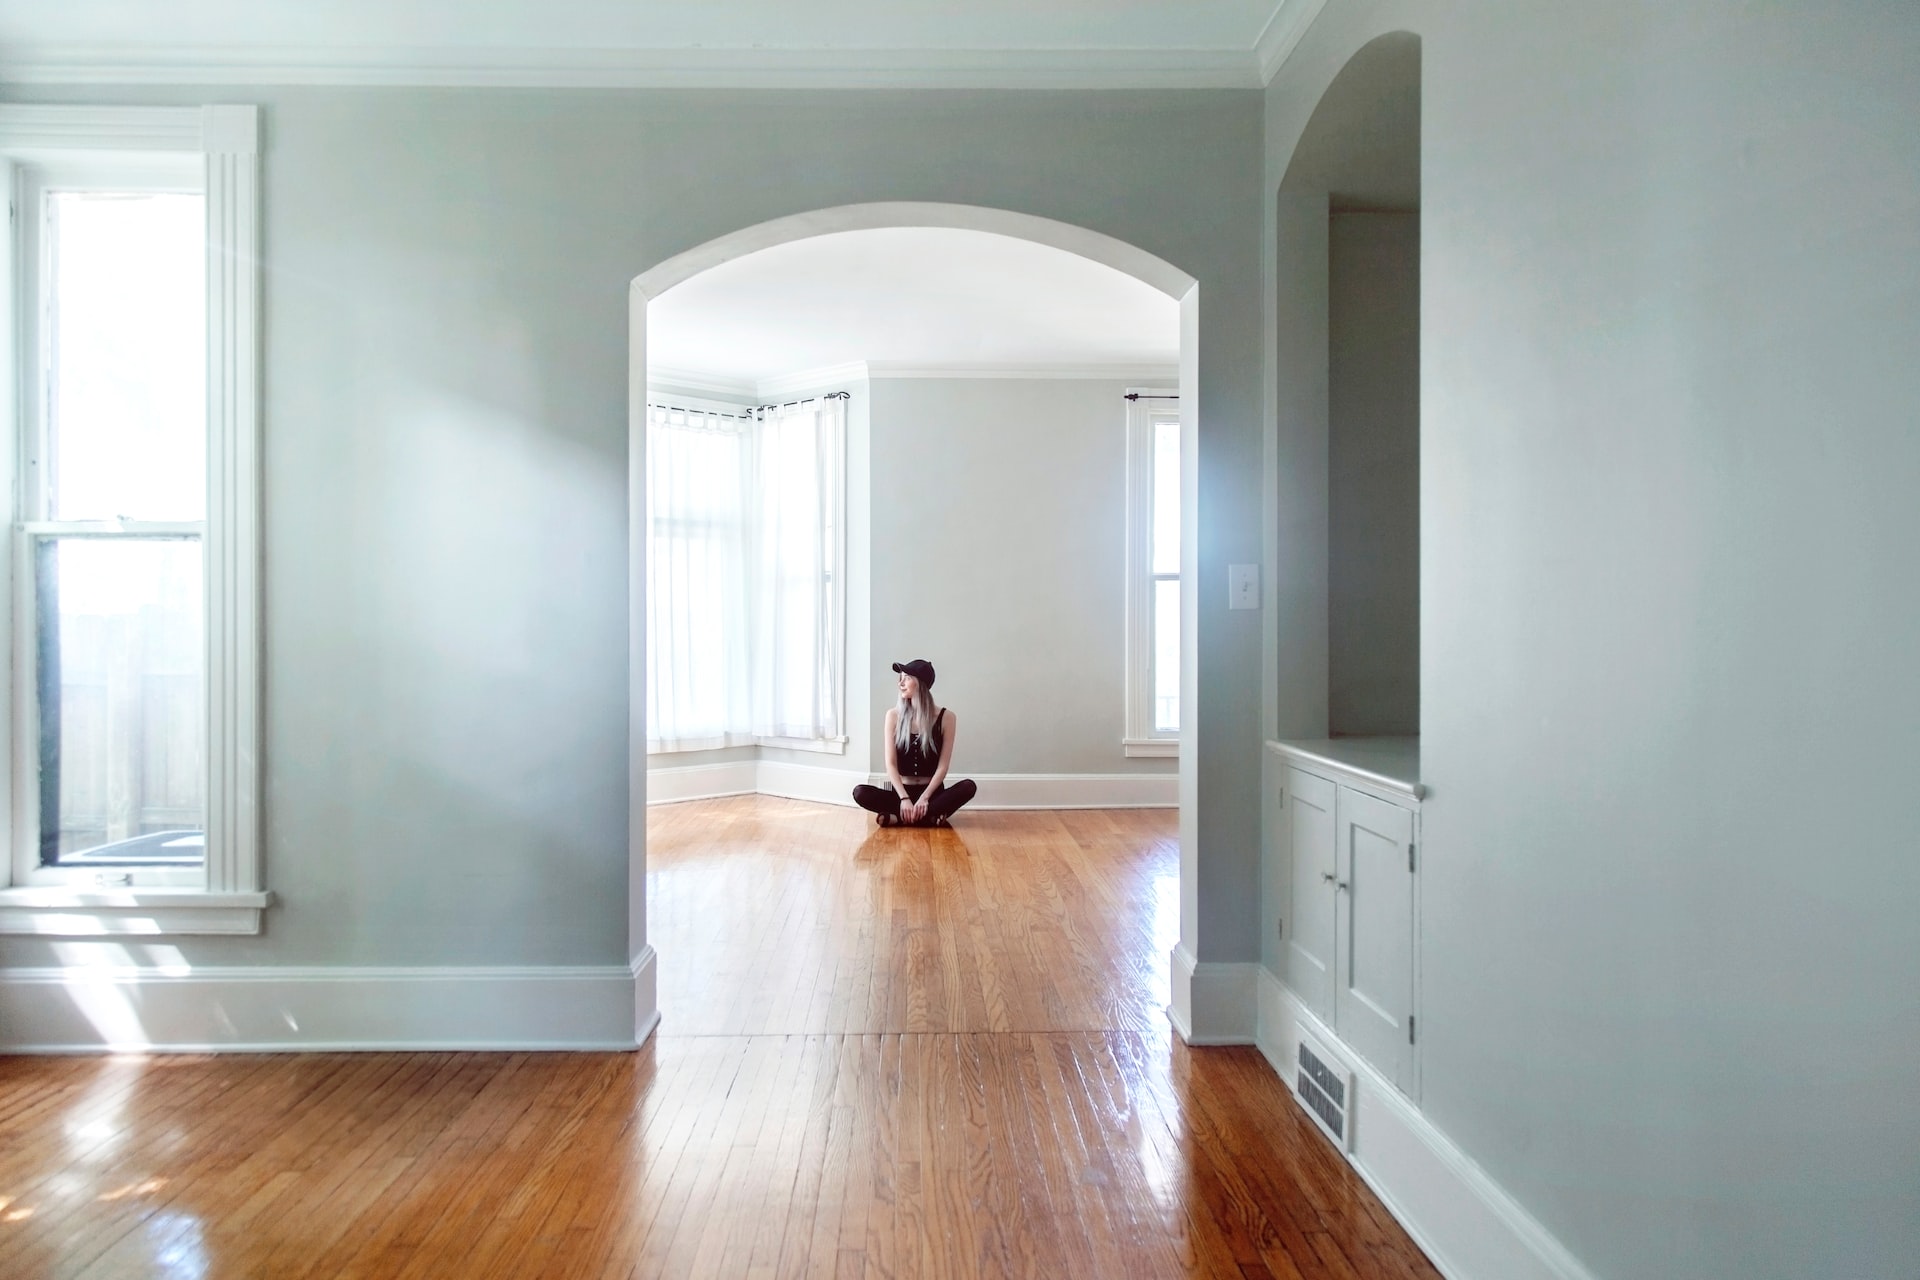 A woman sits on the floor in an empty house.